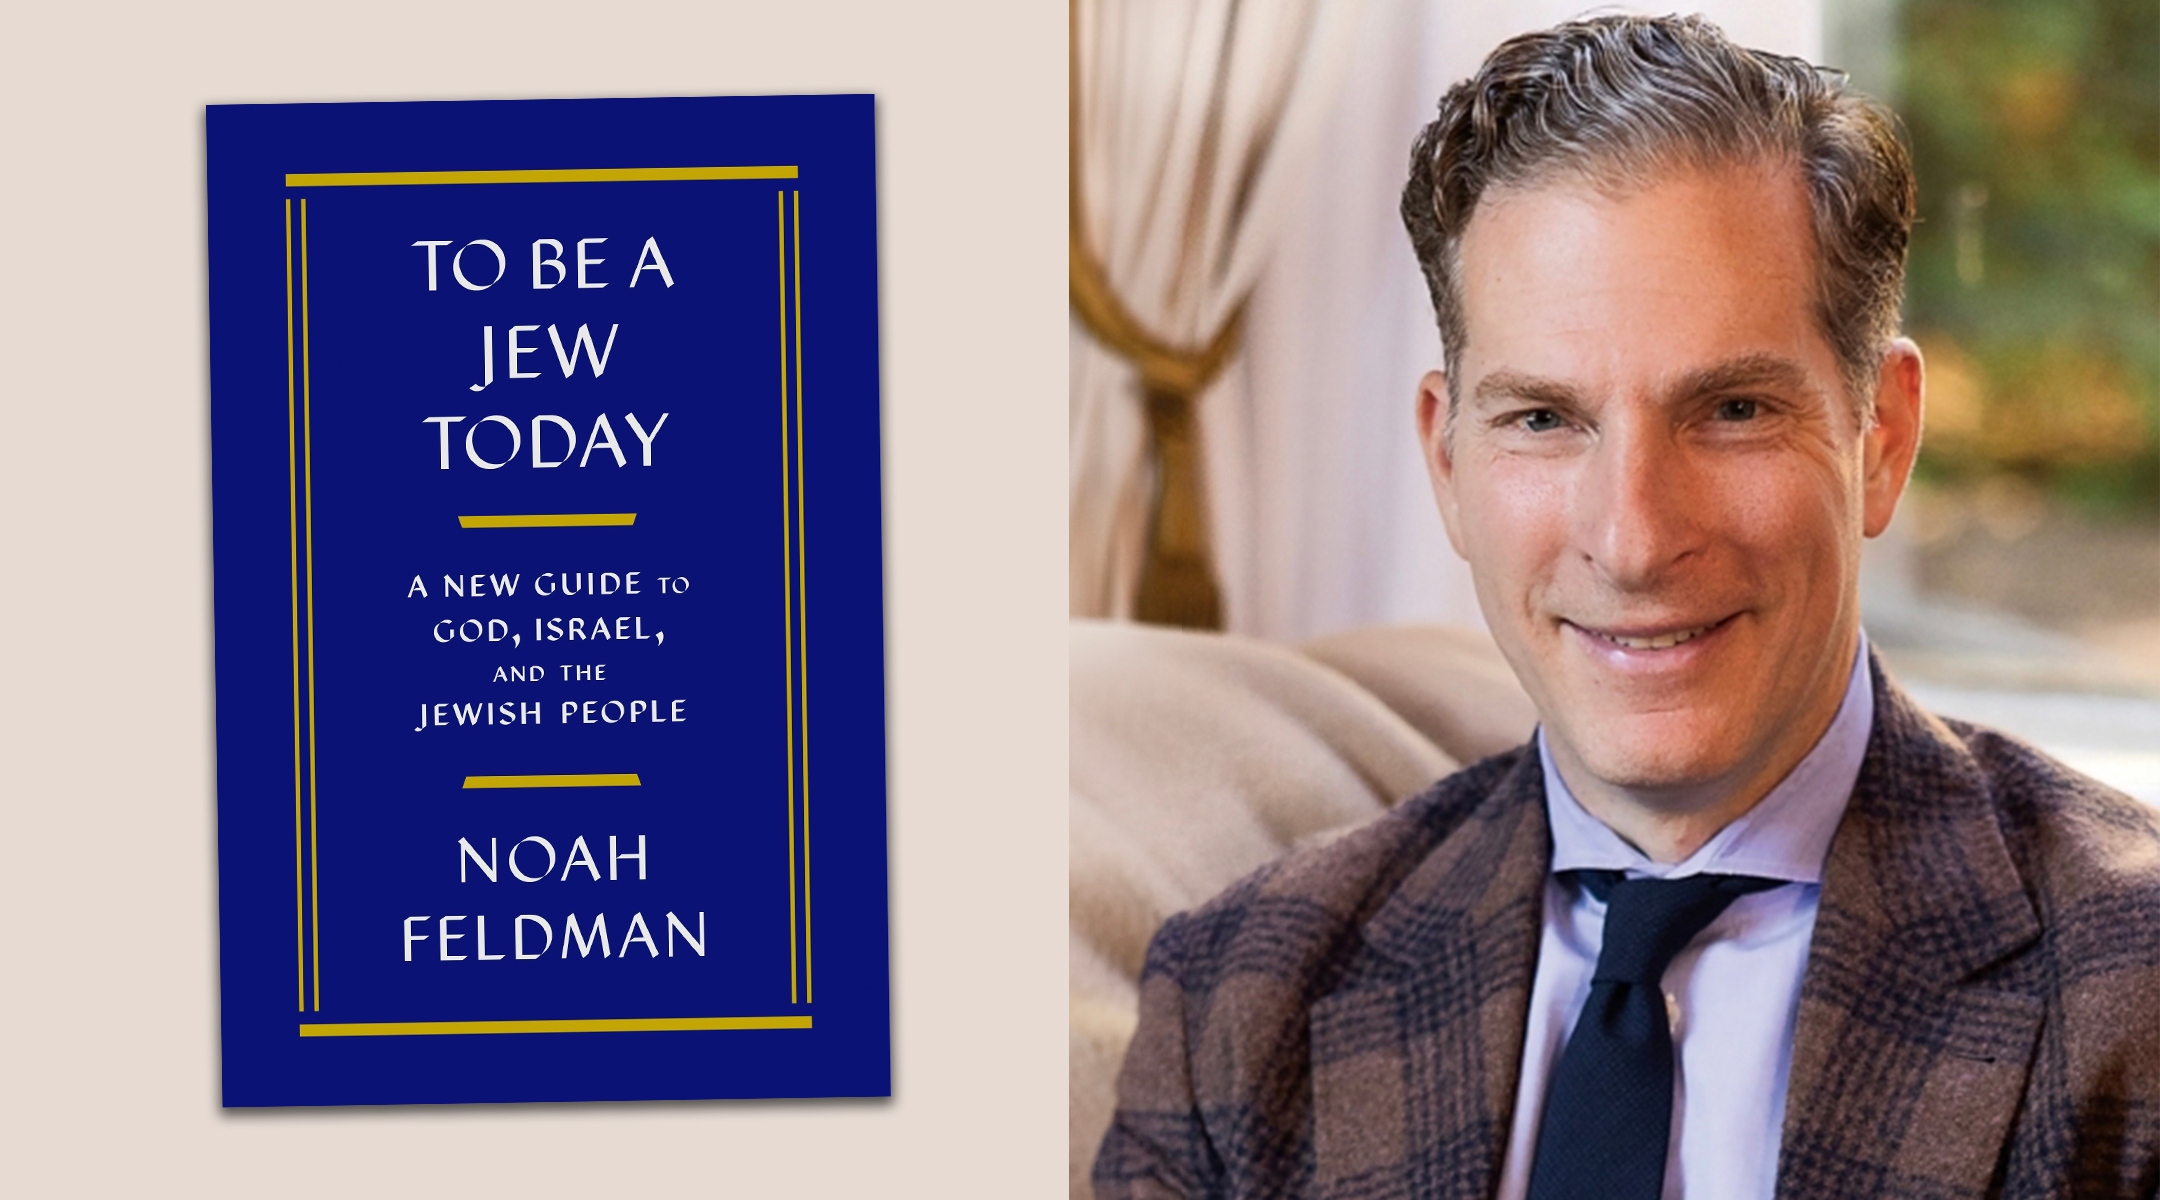 Noah Feldman, whose new book is “To Be a Jew Today,” is the Felix Frankfurter Professor of Law at Harvard University, where he is also founding director of the Julis-Rabinowitz Program on Jewish and Israeli Law. (Farrar, Straus and Giroux; Mark James Dunn)